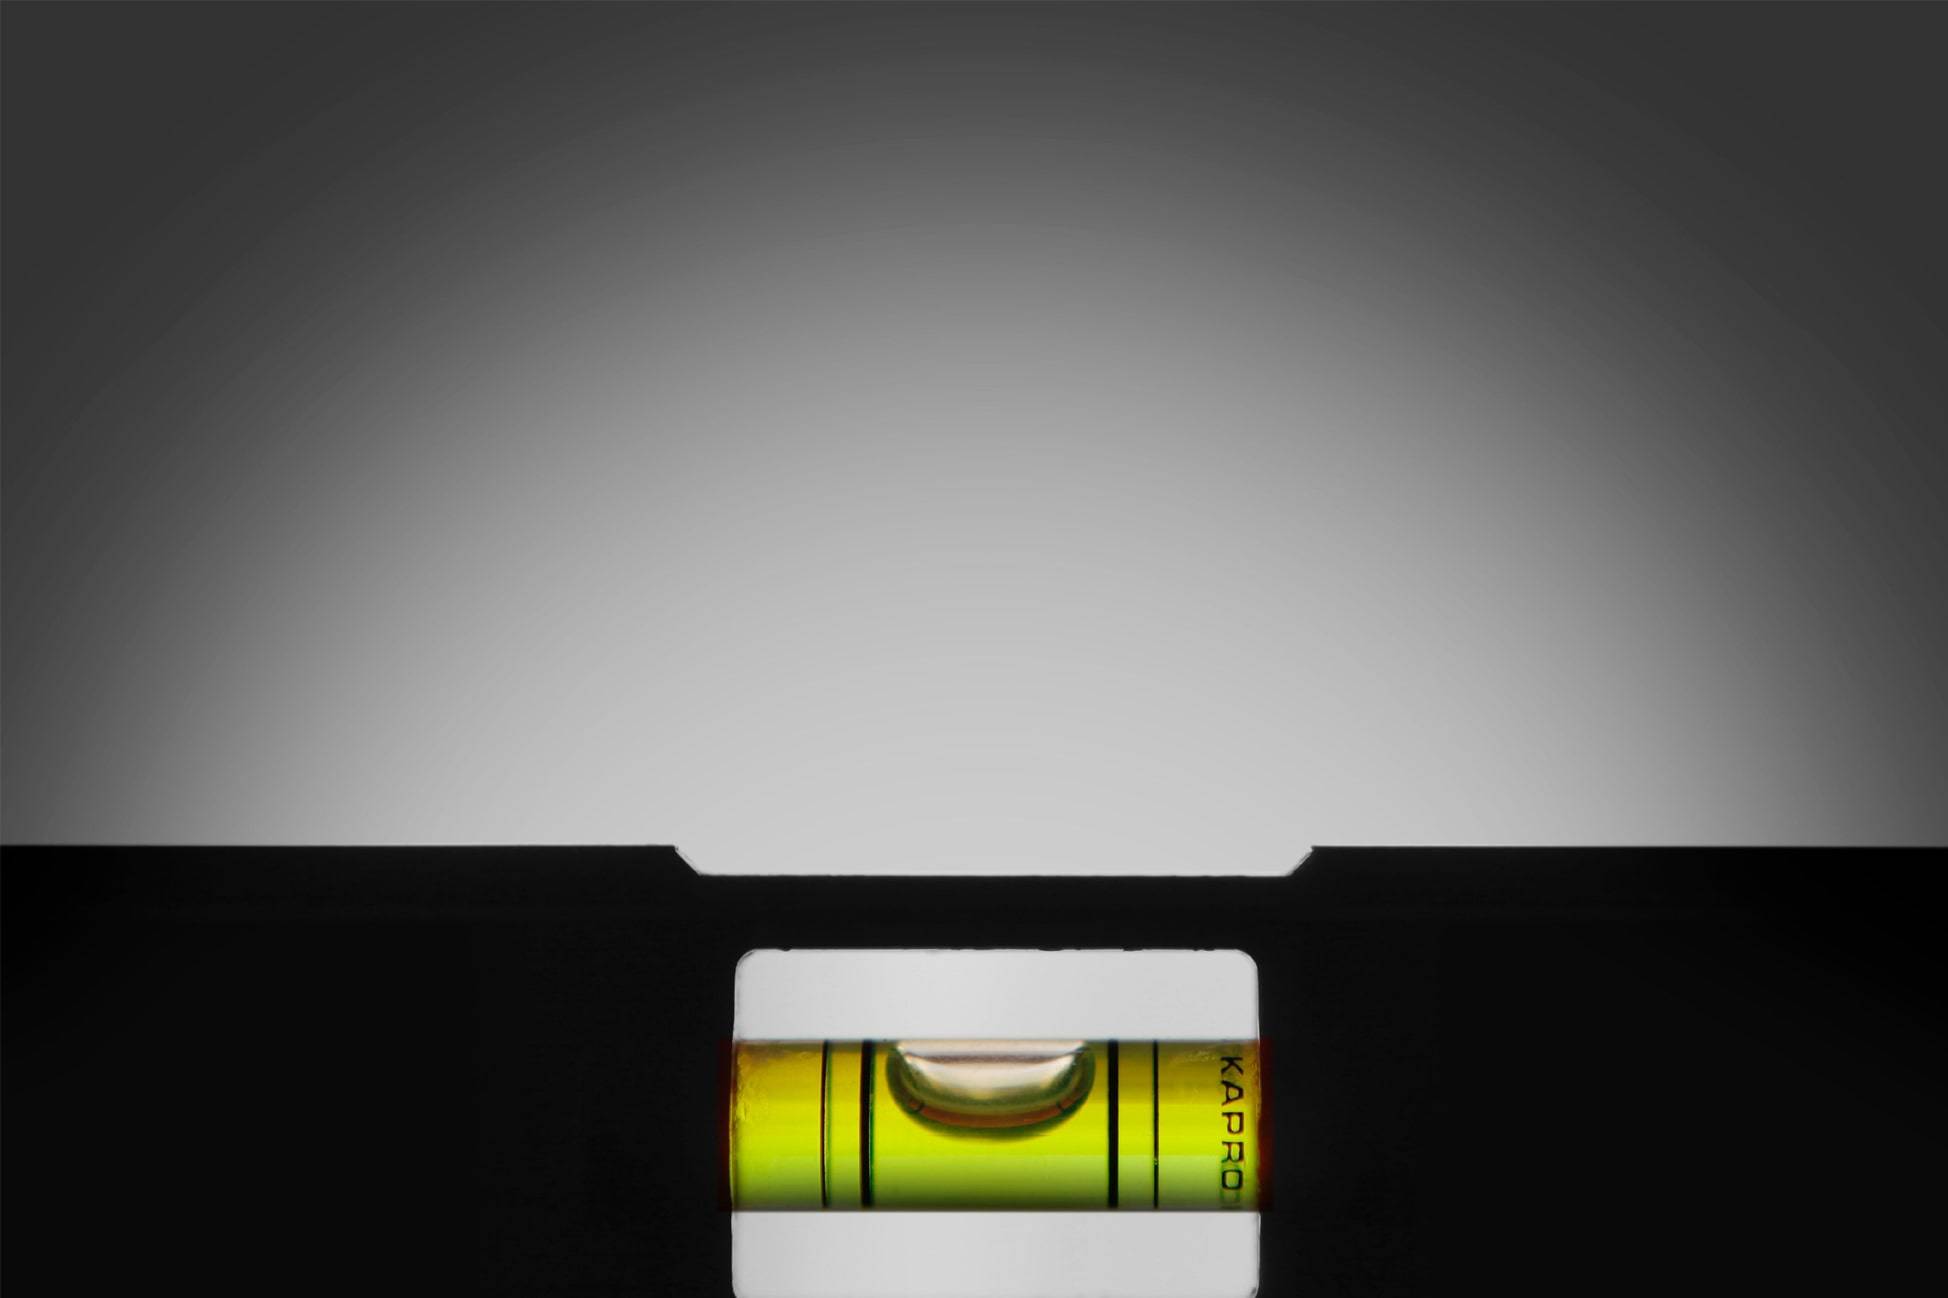 Silhouette Image of a Spirit level